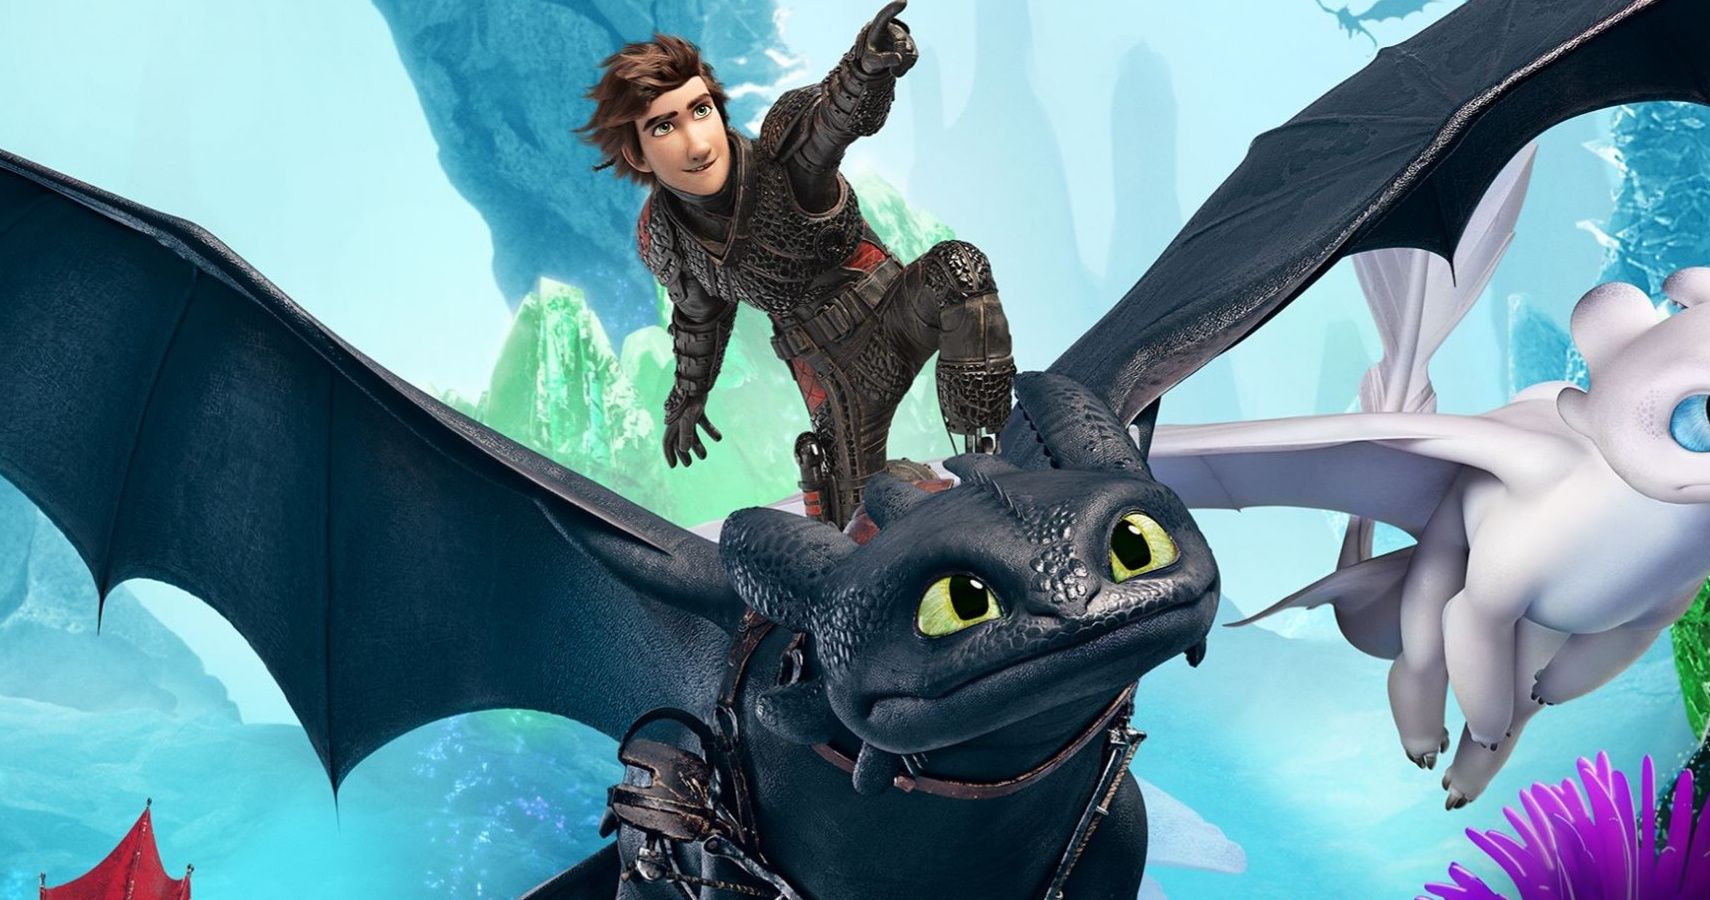 how to train your dragon legends game